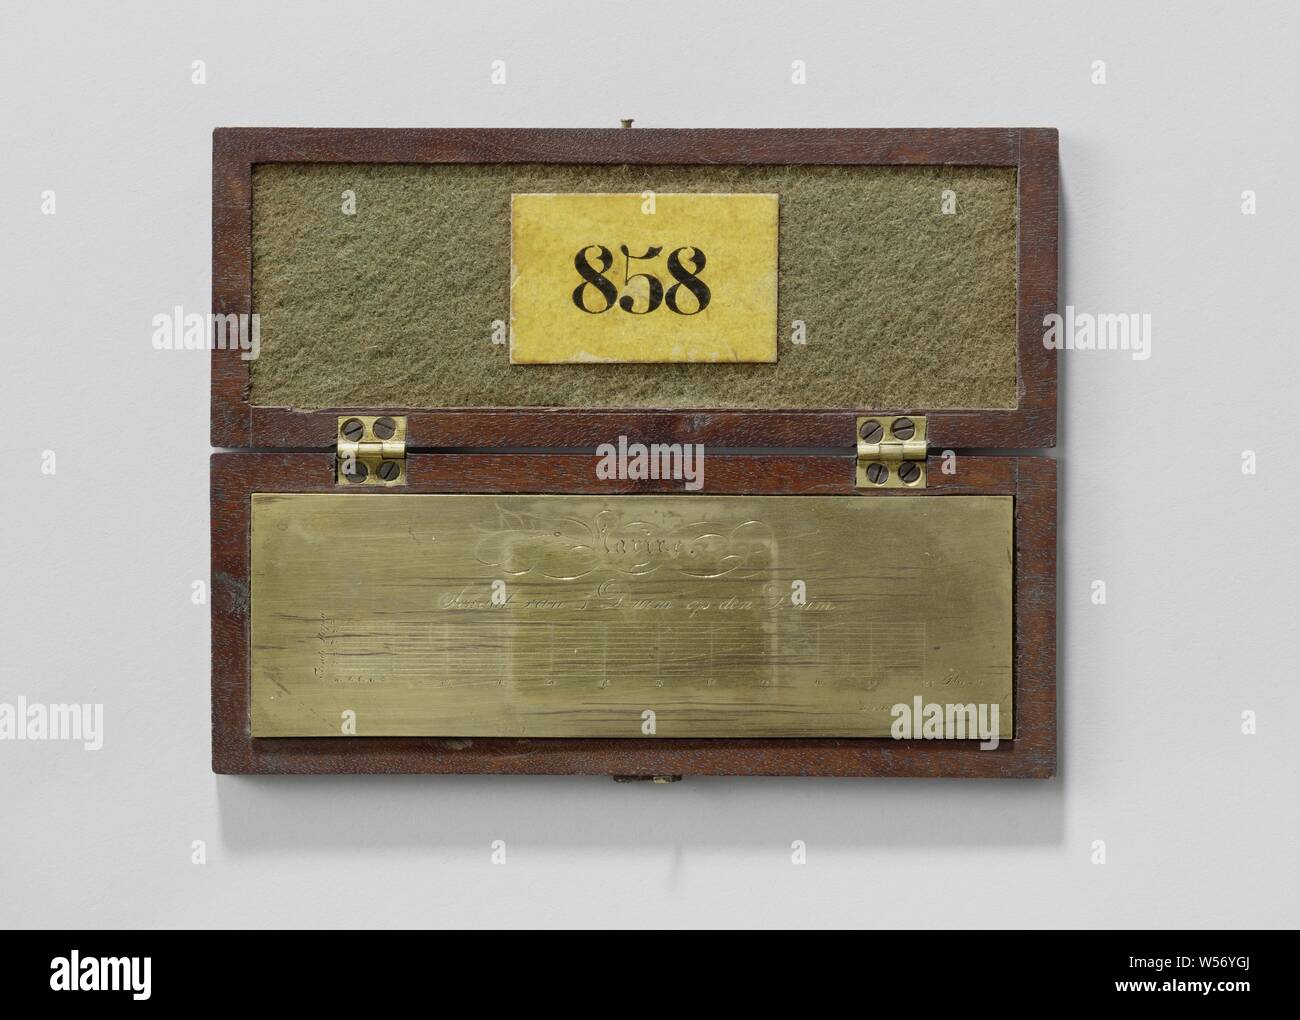 Decimal Scale, White metal drawing scale of 100 mm, one-on-one, in a wooden box with green sheet lining., D. van den Bosch (mentioned on object), Rotterdam, 1821, wood (plant material), brass (alloy), cloth, h 1.5 cm × w 16 cm × d 6.2 cm Stock Photo